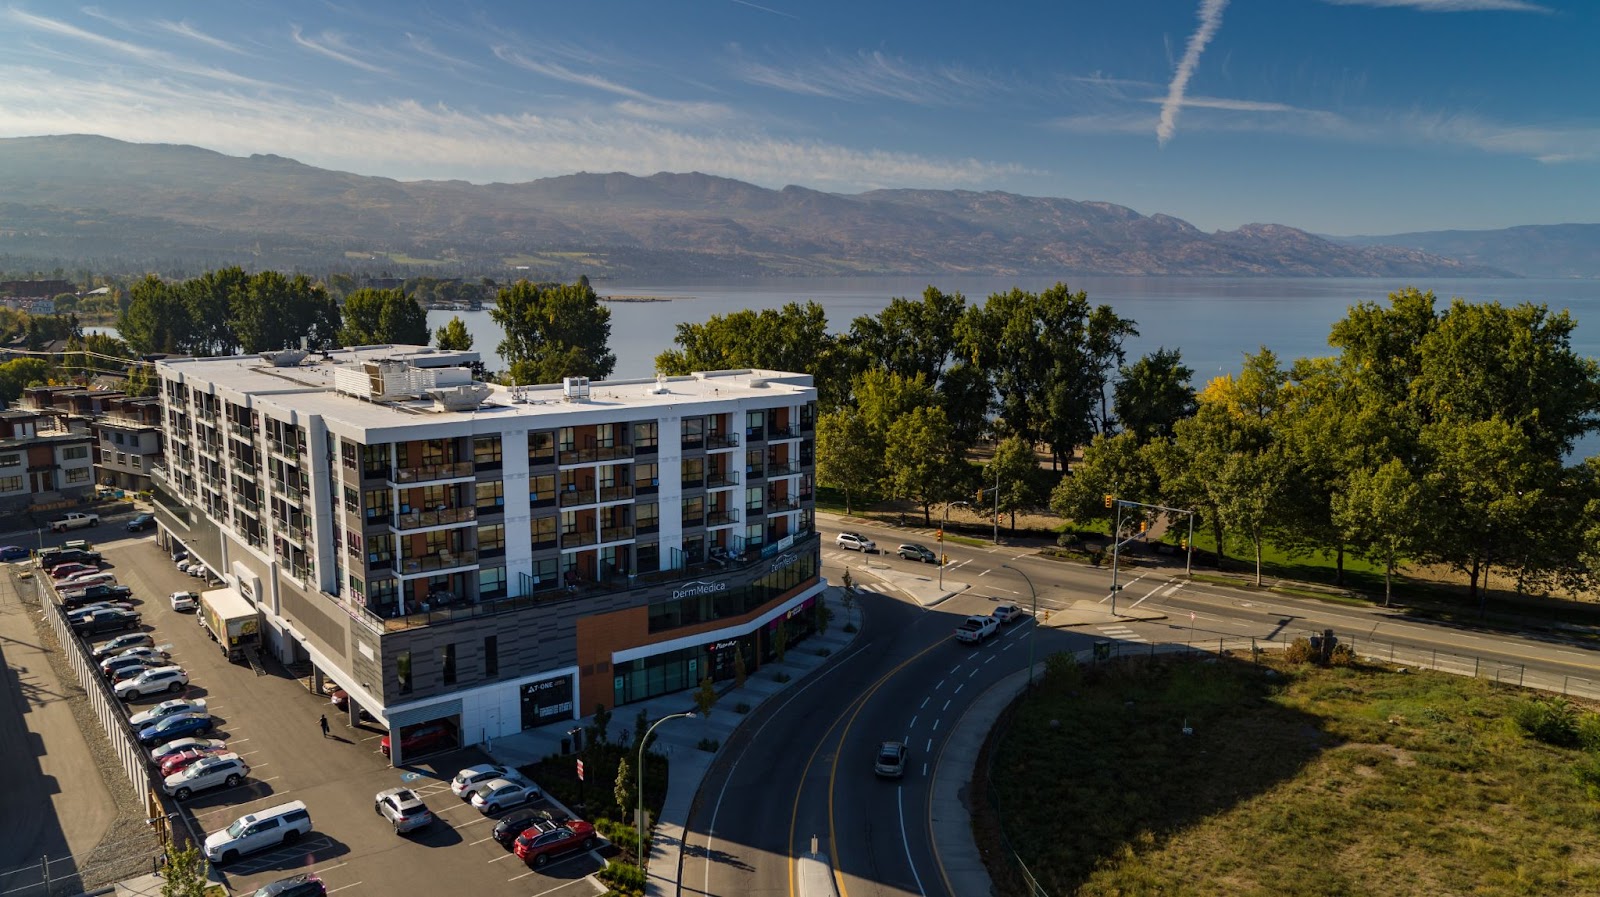 the shore kelowna apartment hotel from the side-back view, looking out over the lake, Gyro beach and Okanagan Valley mountains in the distance